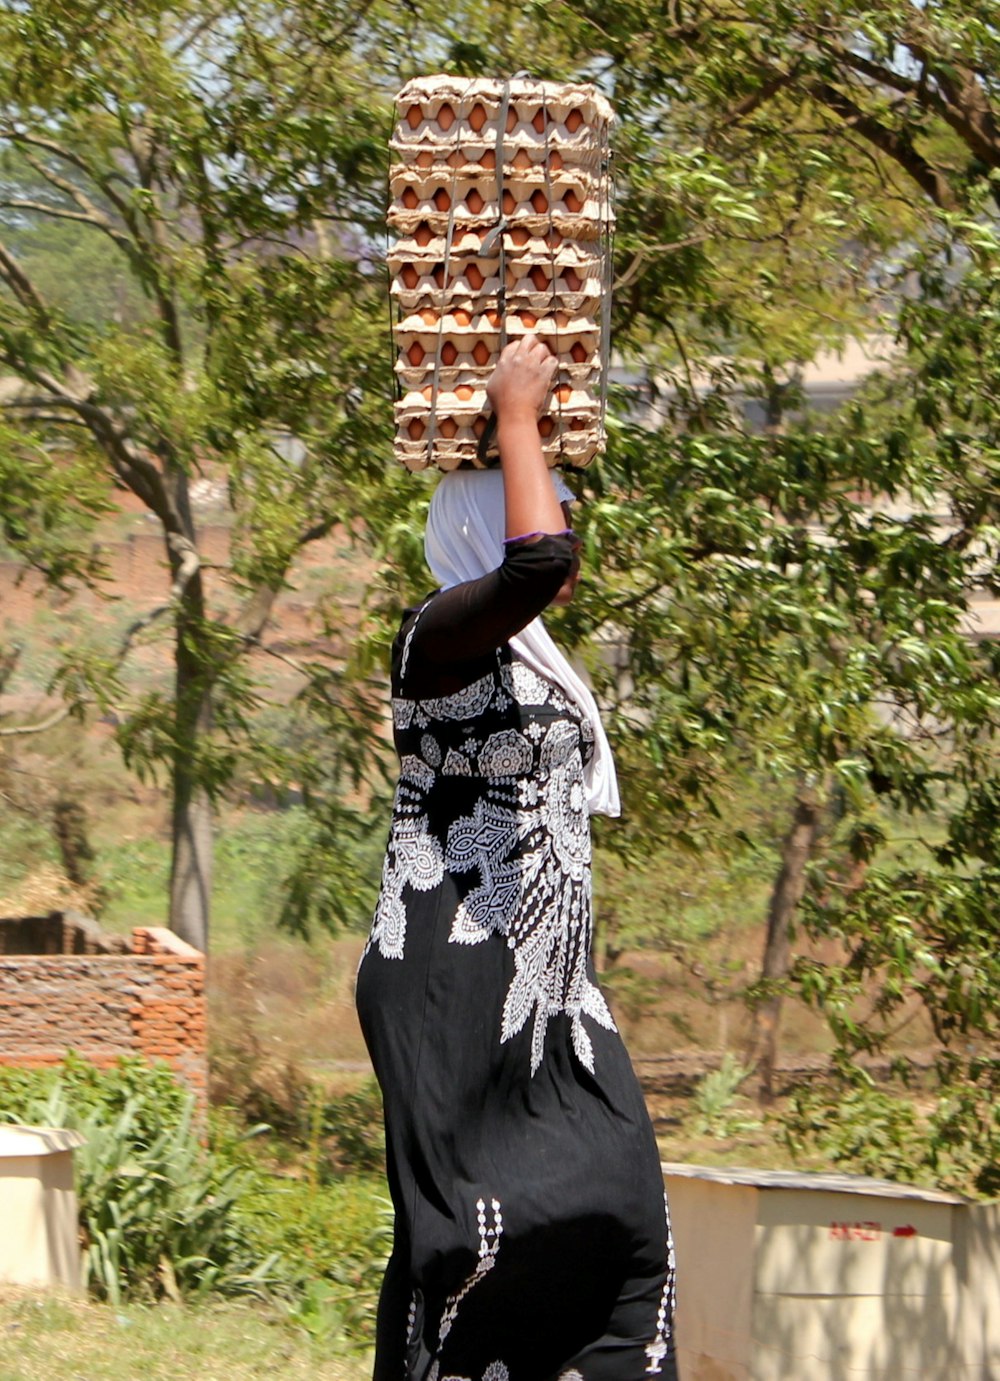 a person holding a large wooden object